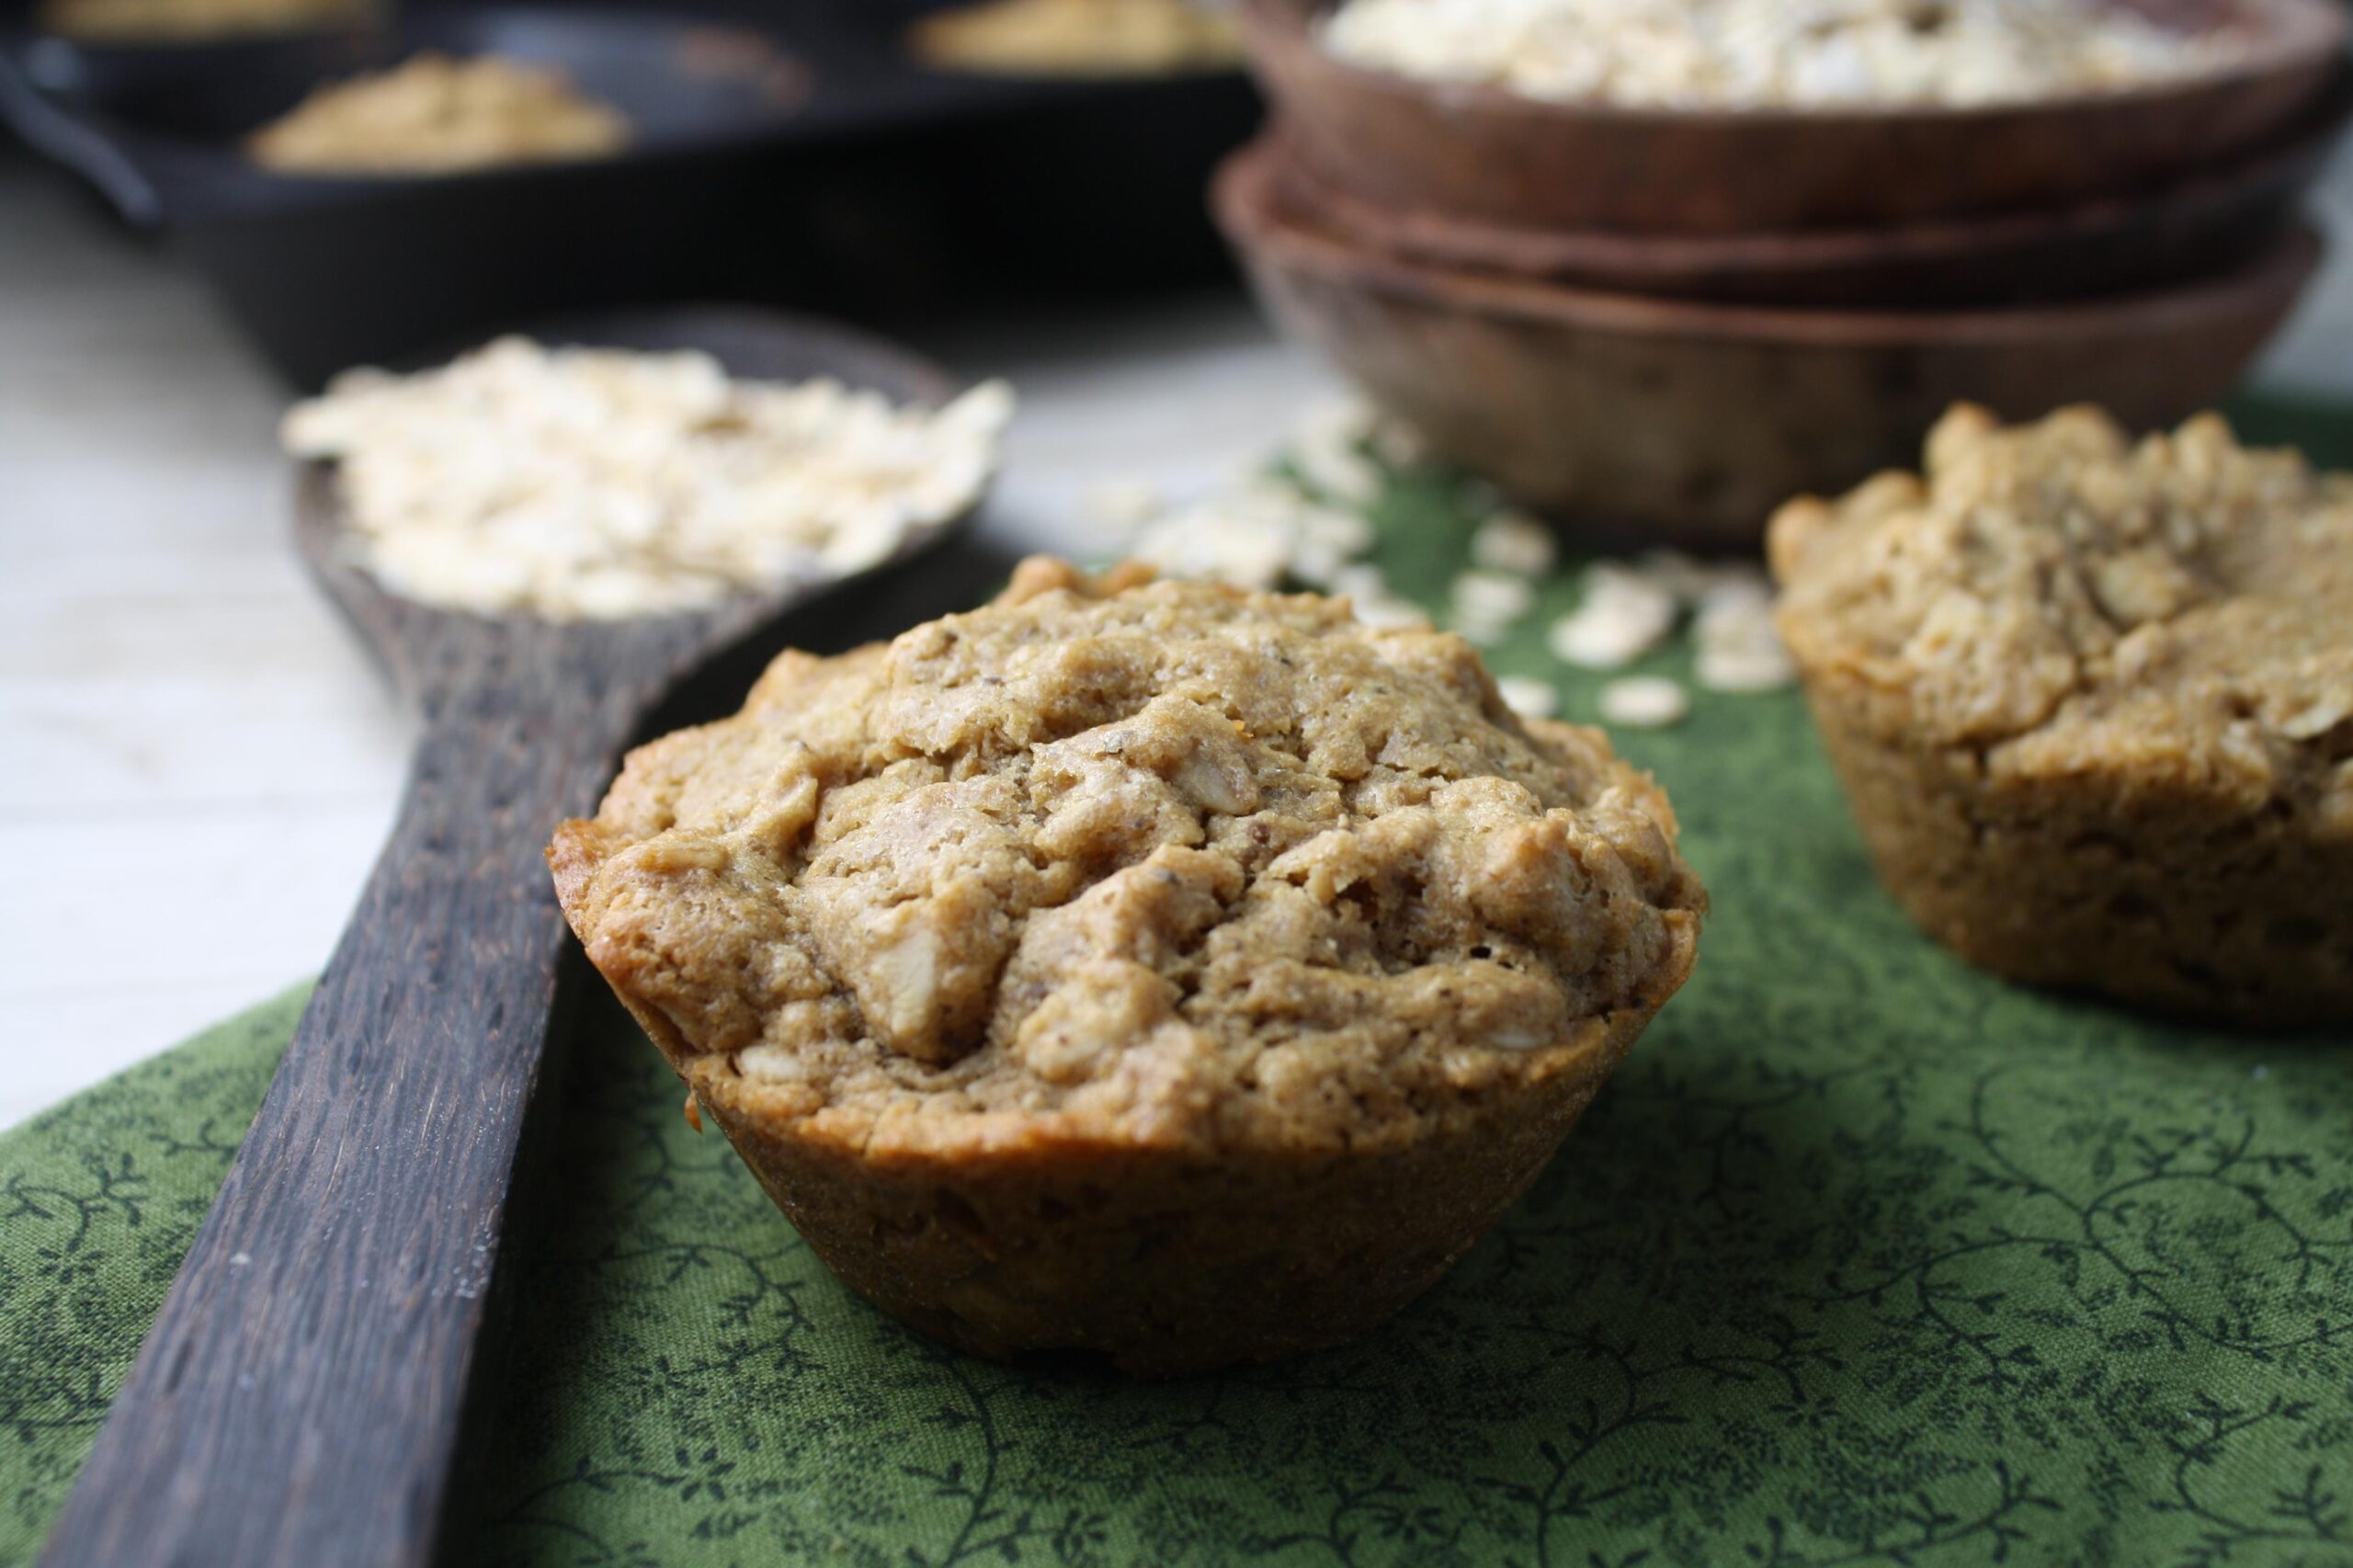  The combination of oats and almond flour makes for a deliciously nutty flavor.